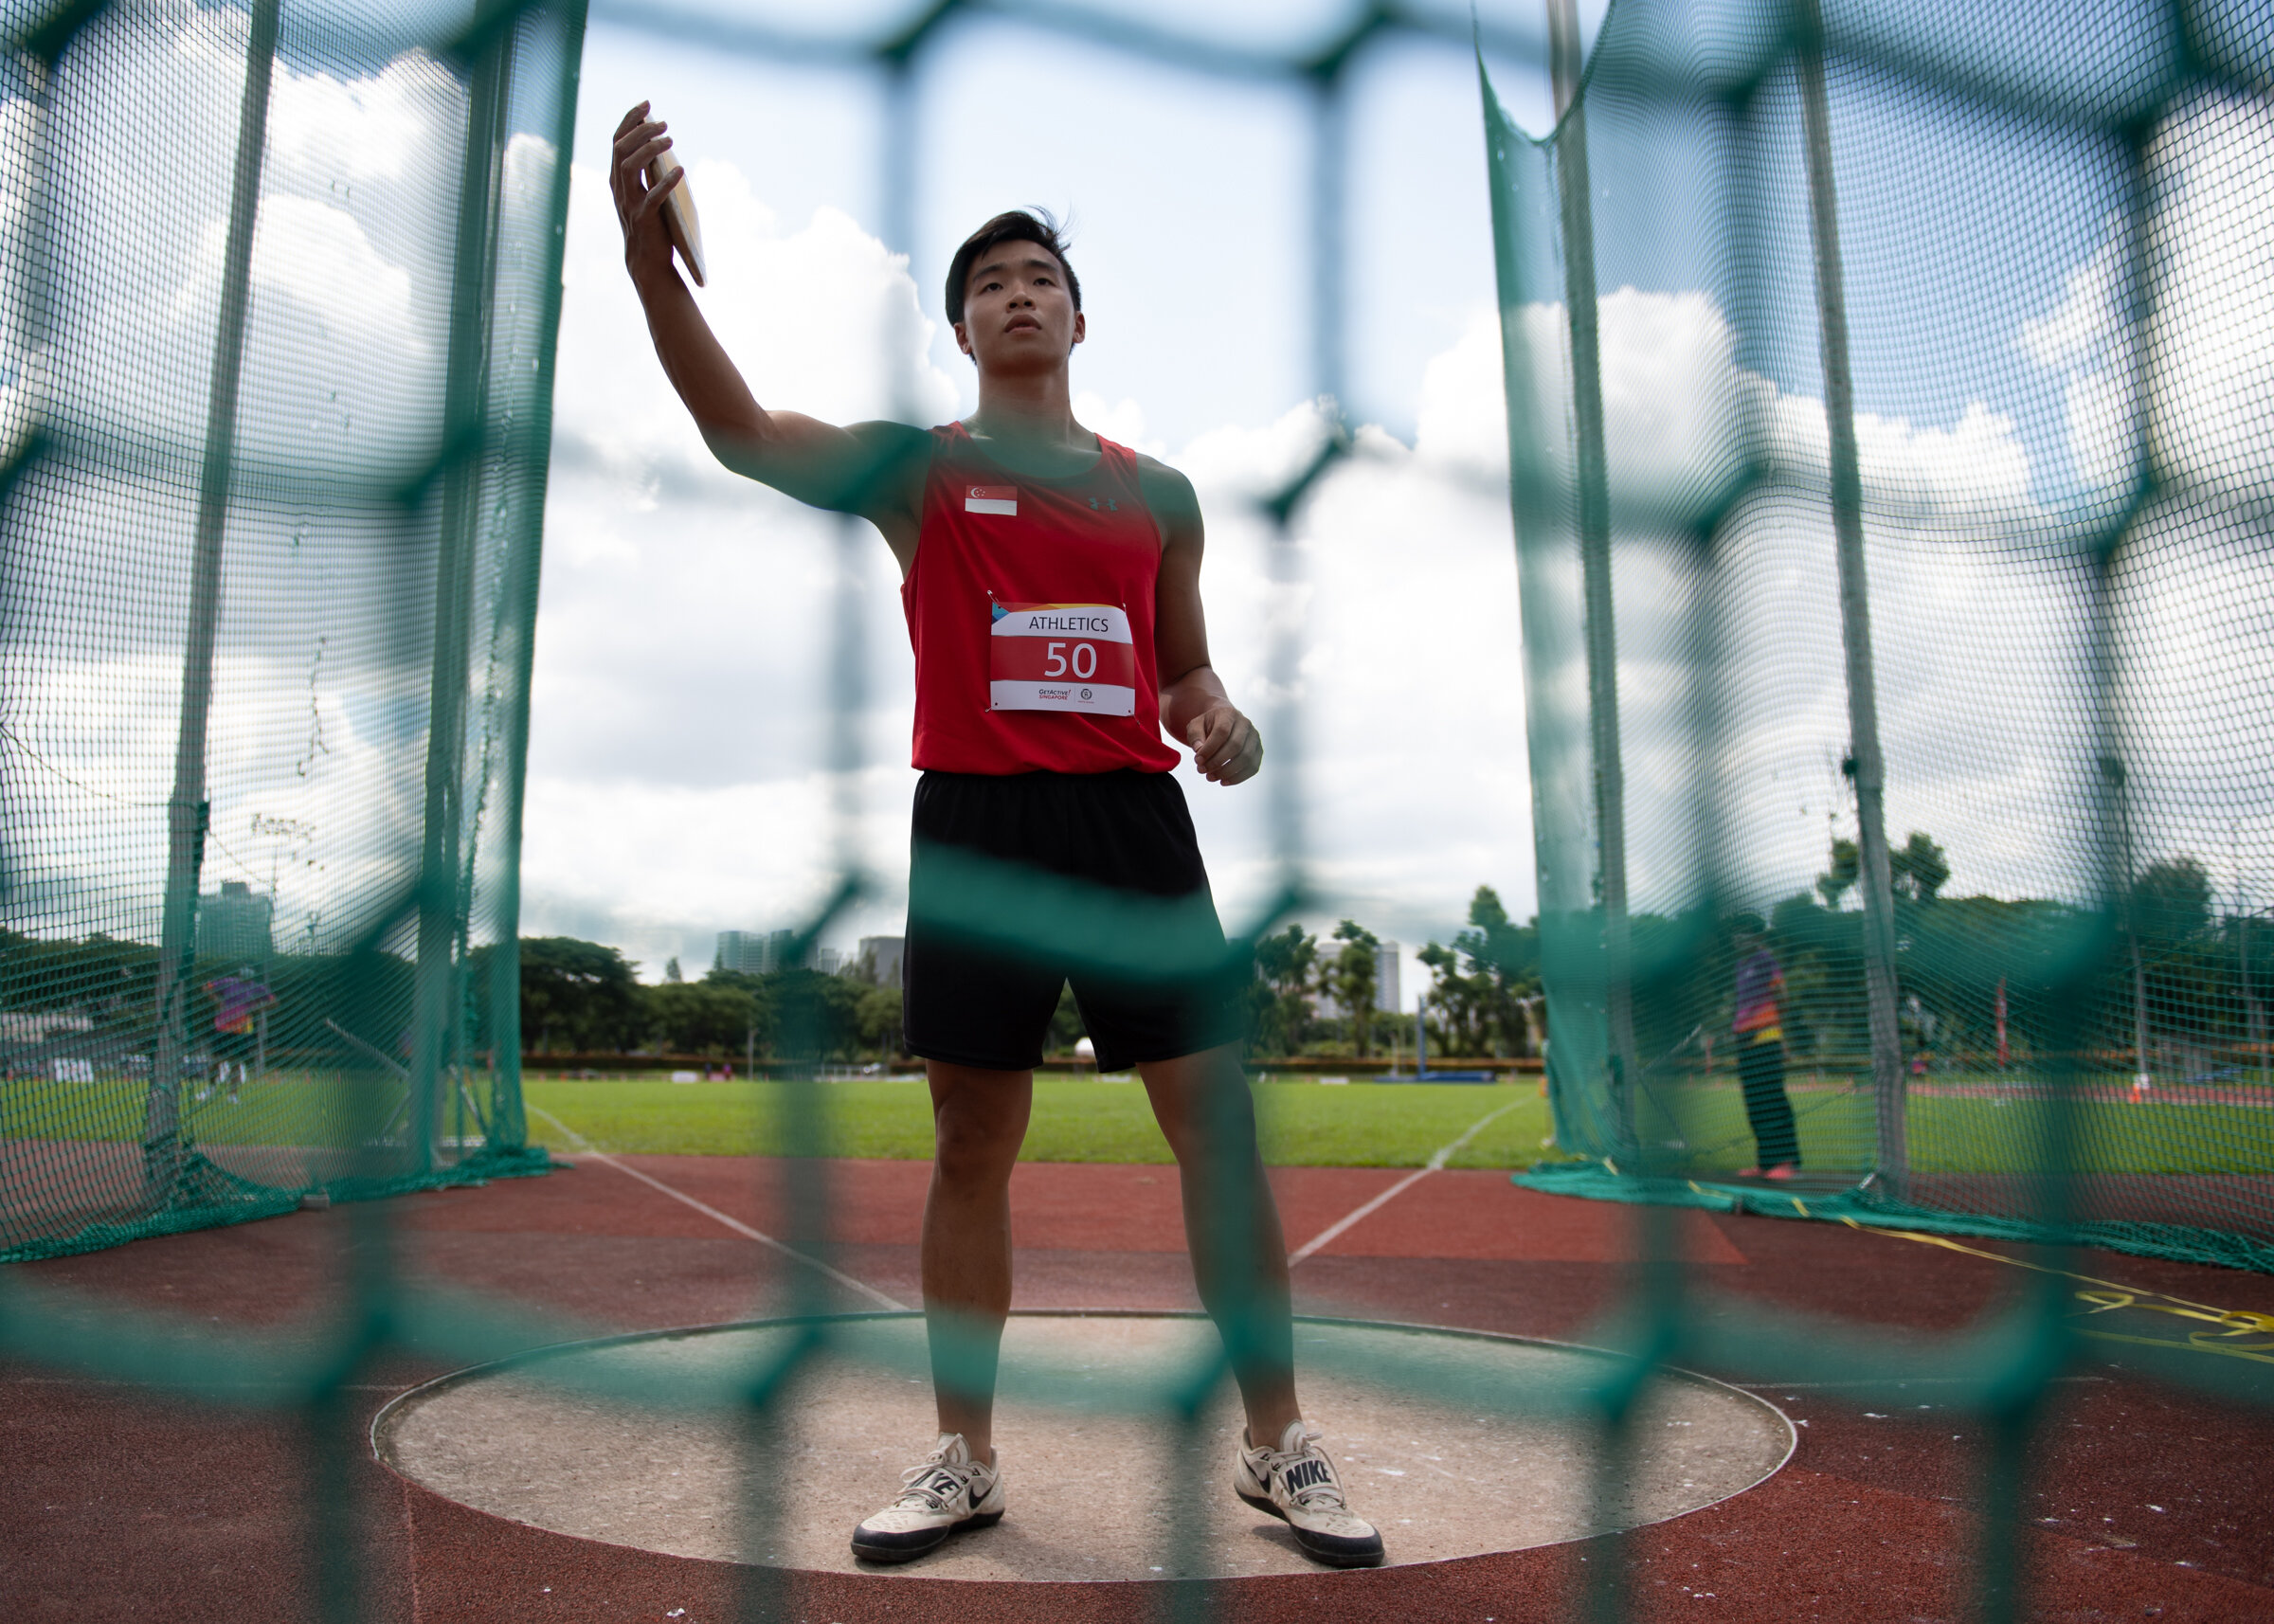 A Singaporean Discus thrower during the Singapore Open Track and Field Championships held at the Home of Athletics.